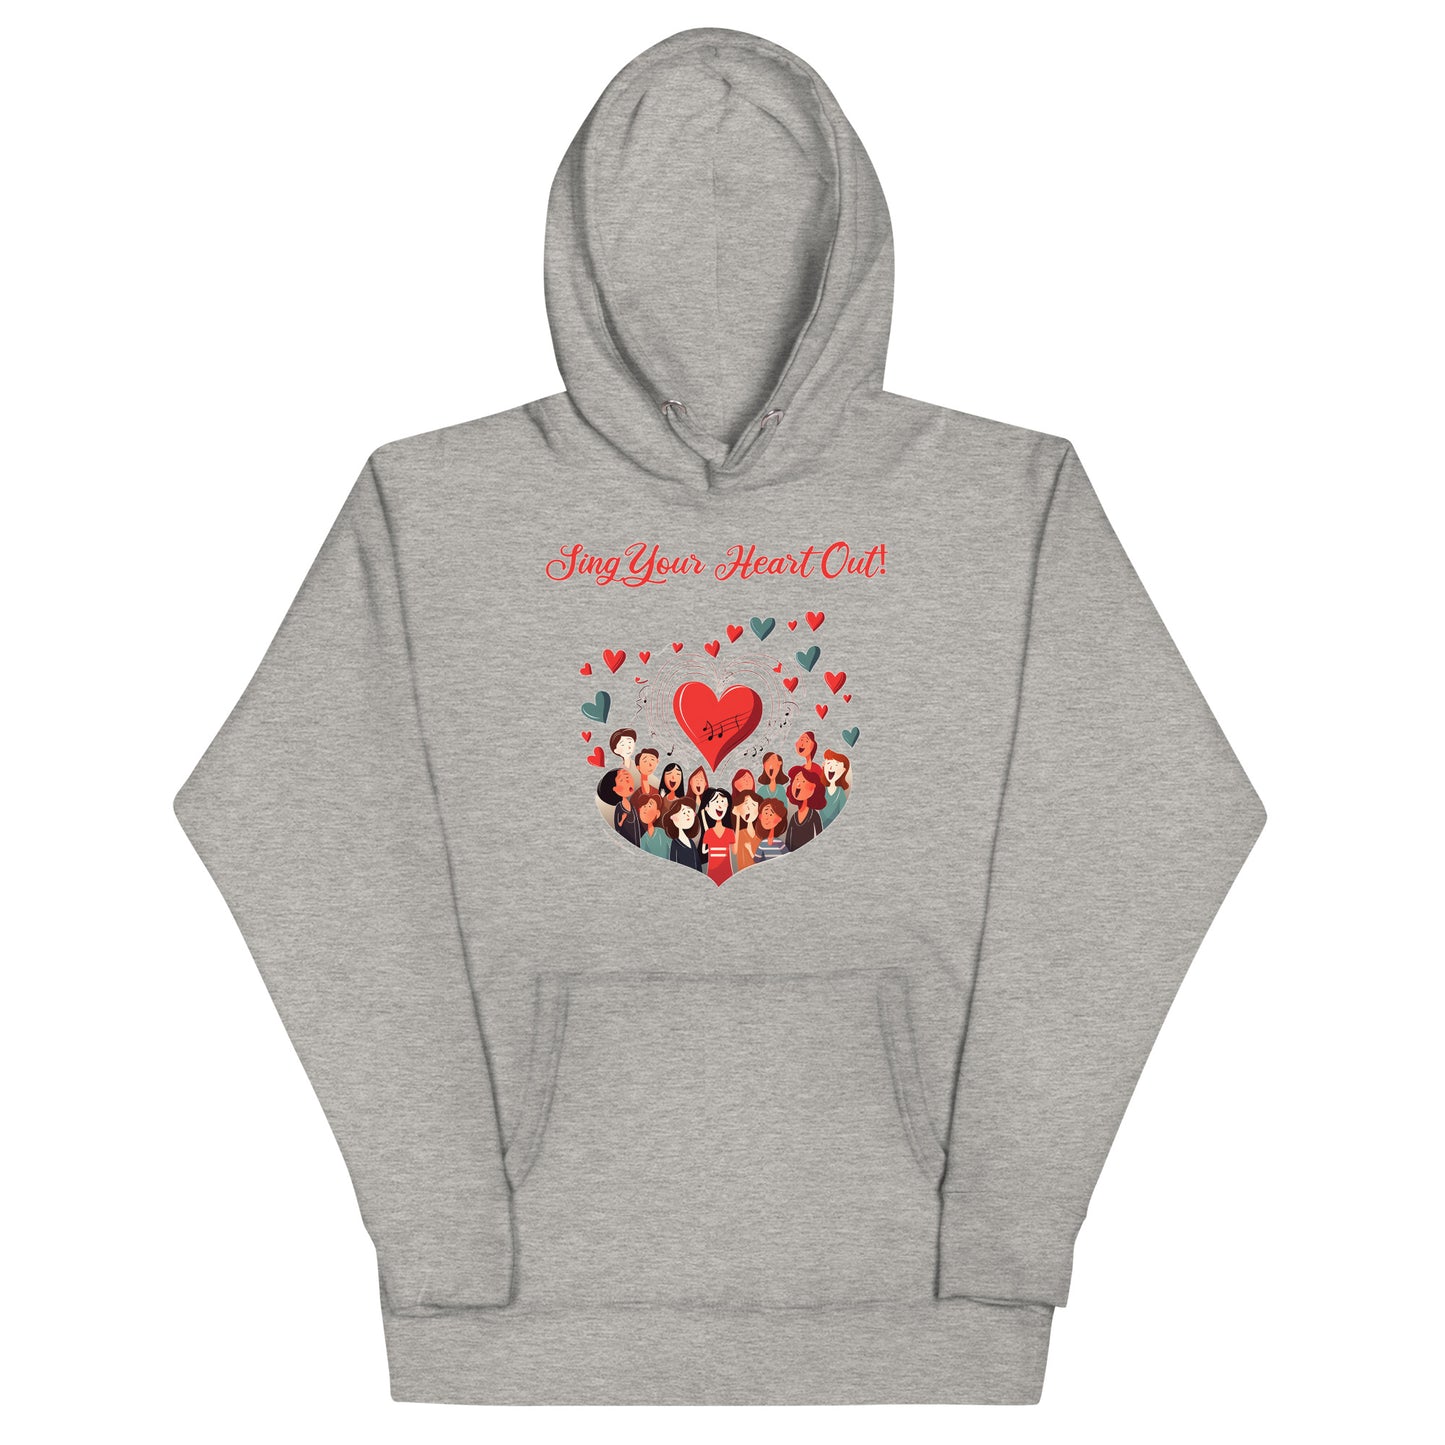 Sing Your Heart Out - Unisex Hoodie